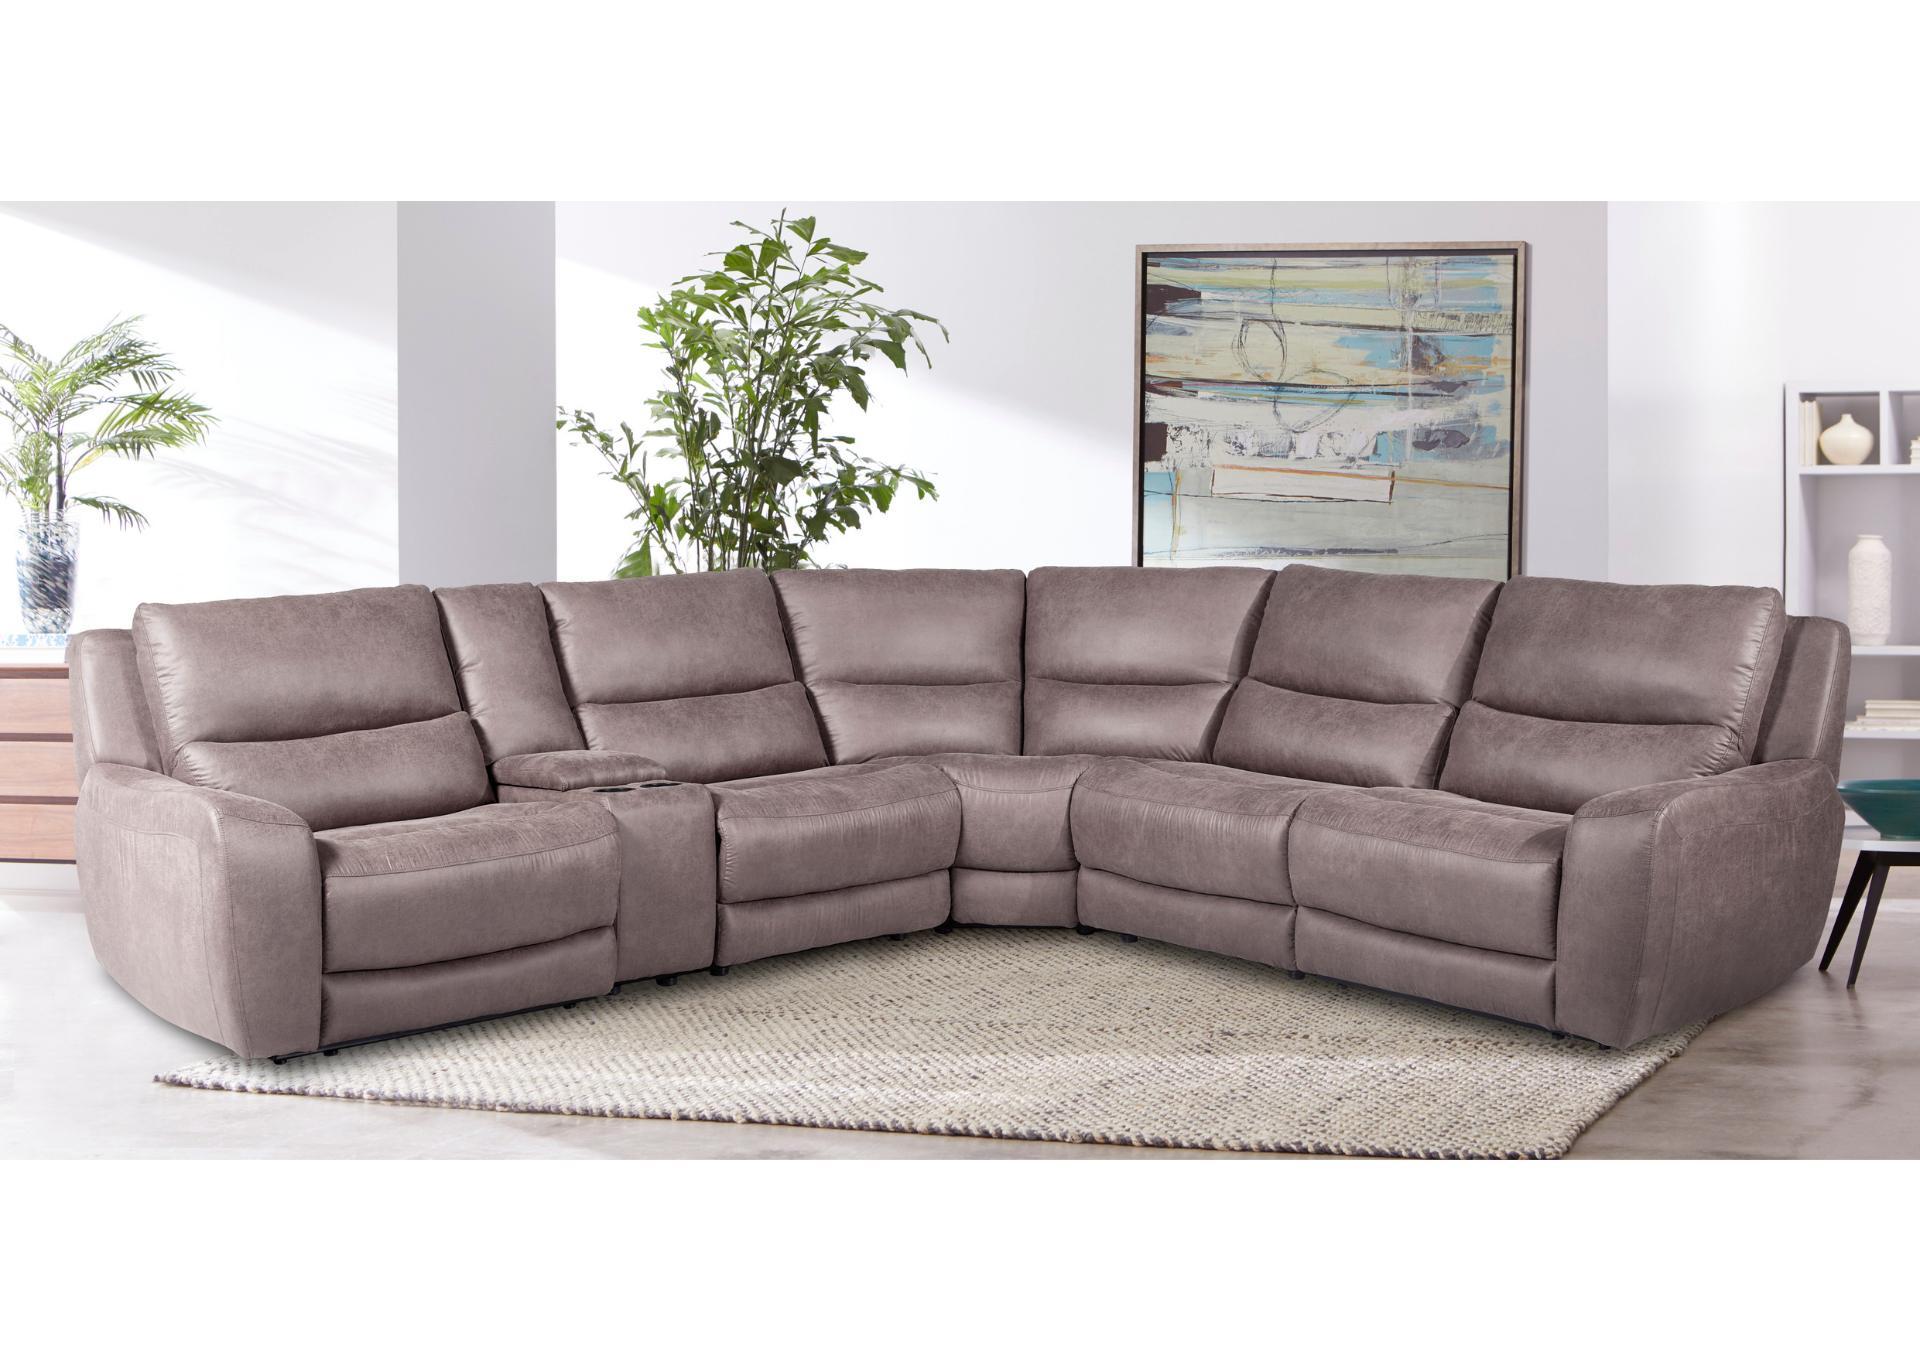 HENLEY SLATE 6 PIECE POWER RECLINING SECTIONAL,CHEERS